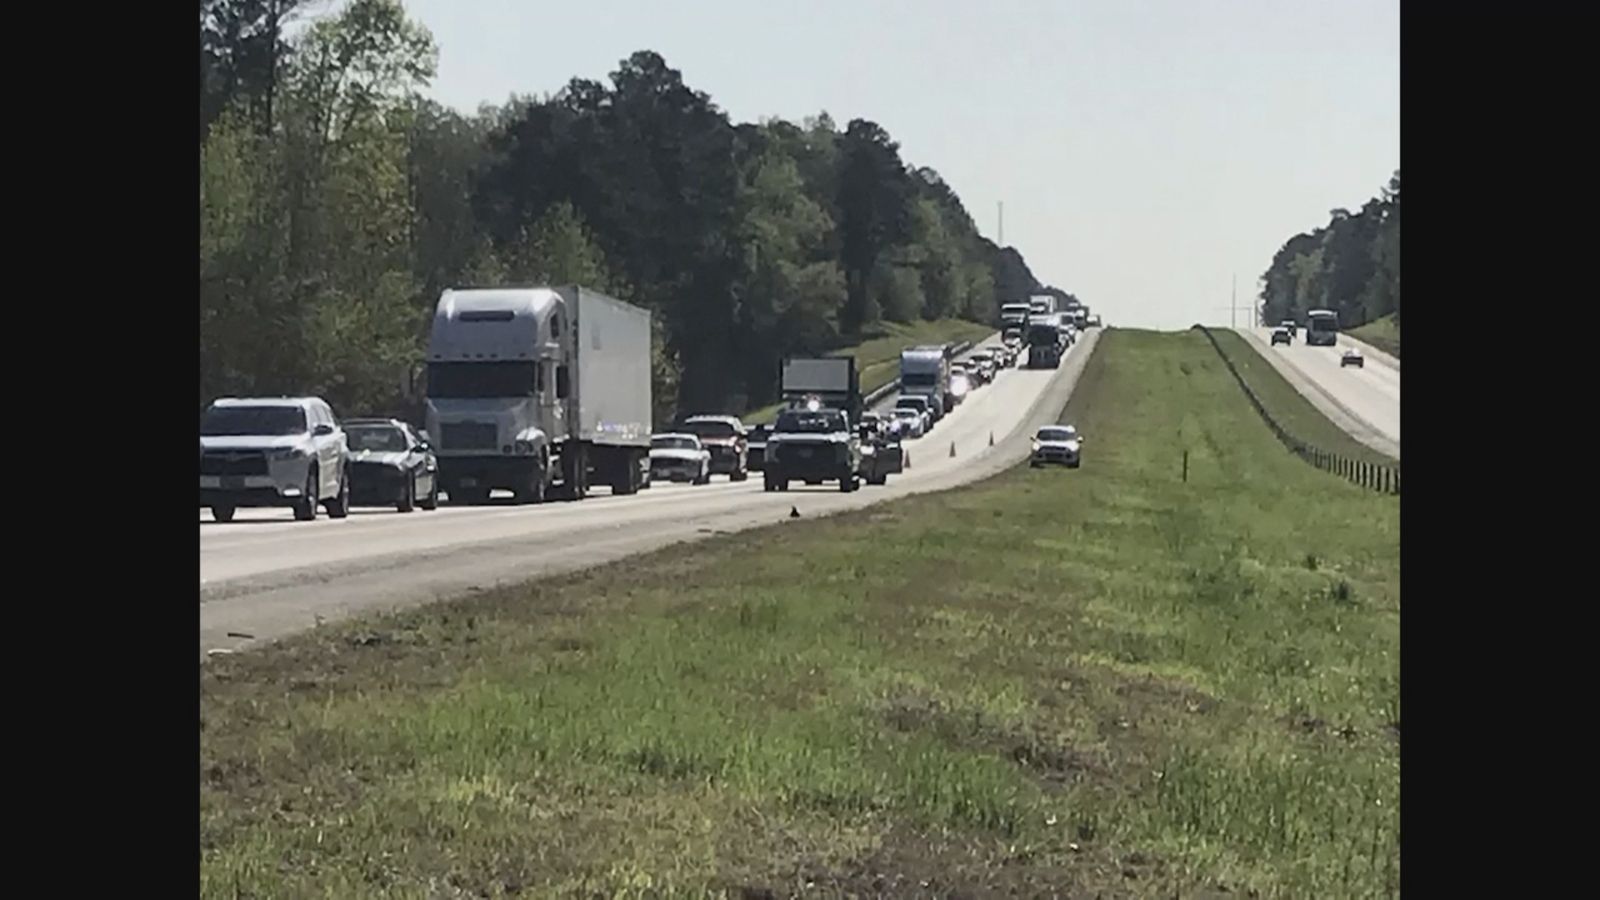 PHOTO:A  view of traffic caused by a charter bus that crashed on the eastbound interstate 20, April 5, 2018 near Harlem, Ga.